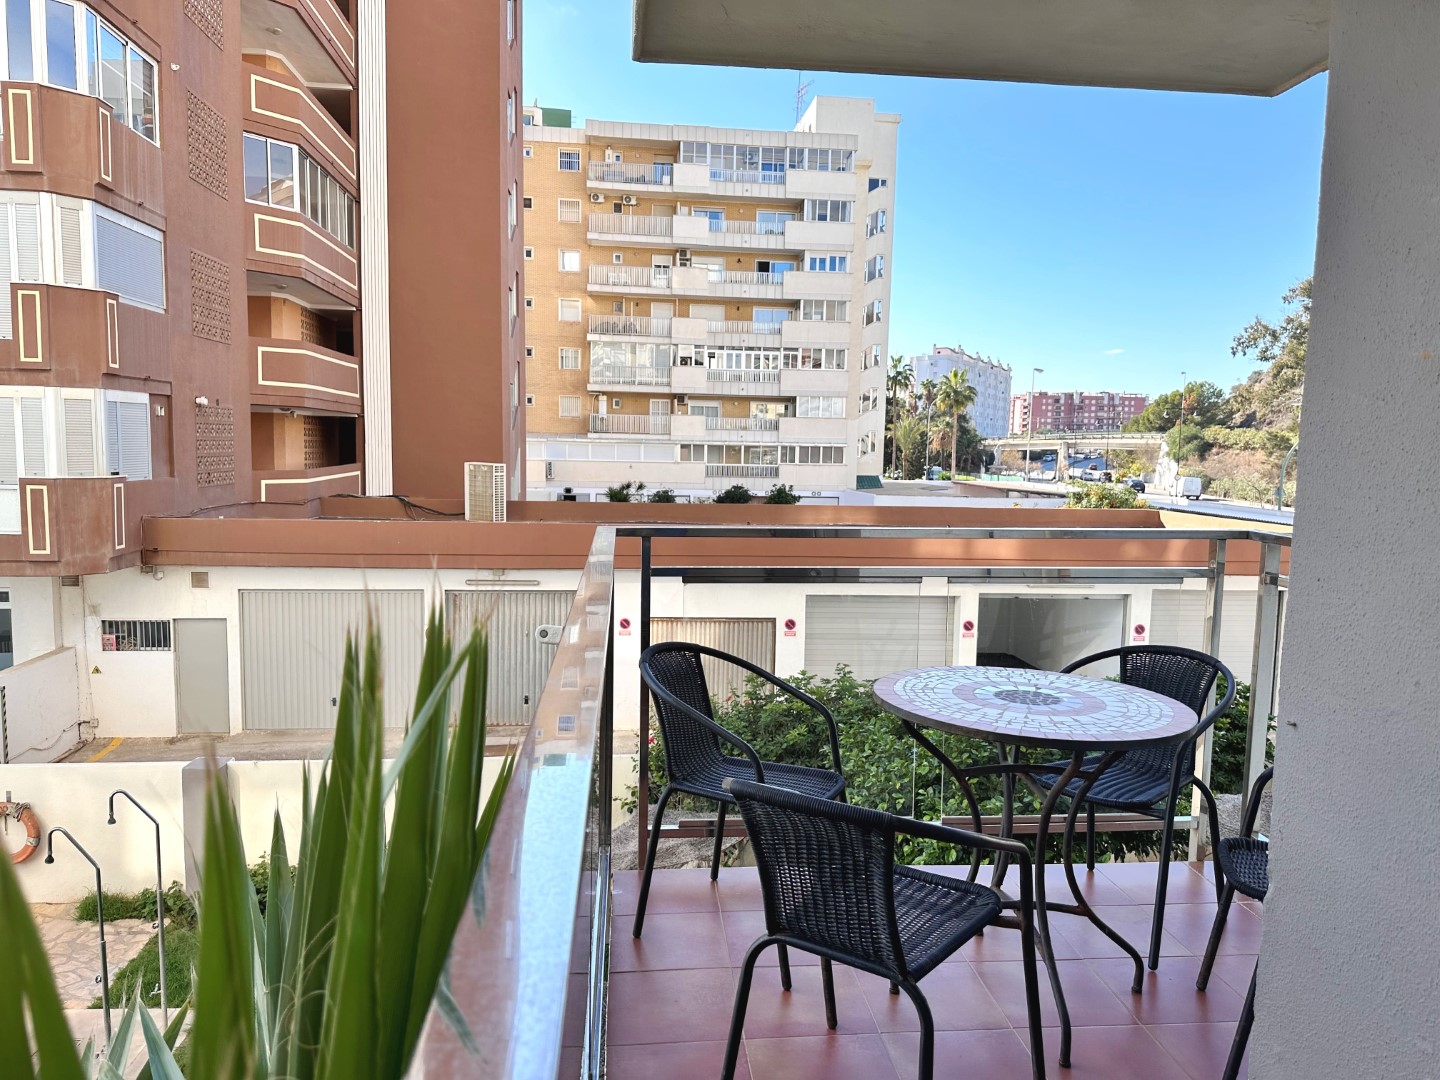 Apartment located on the Paseo Maritimo with beautiful sea views